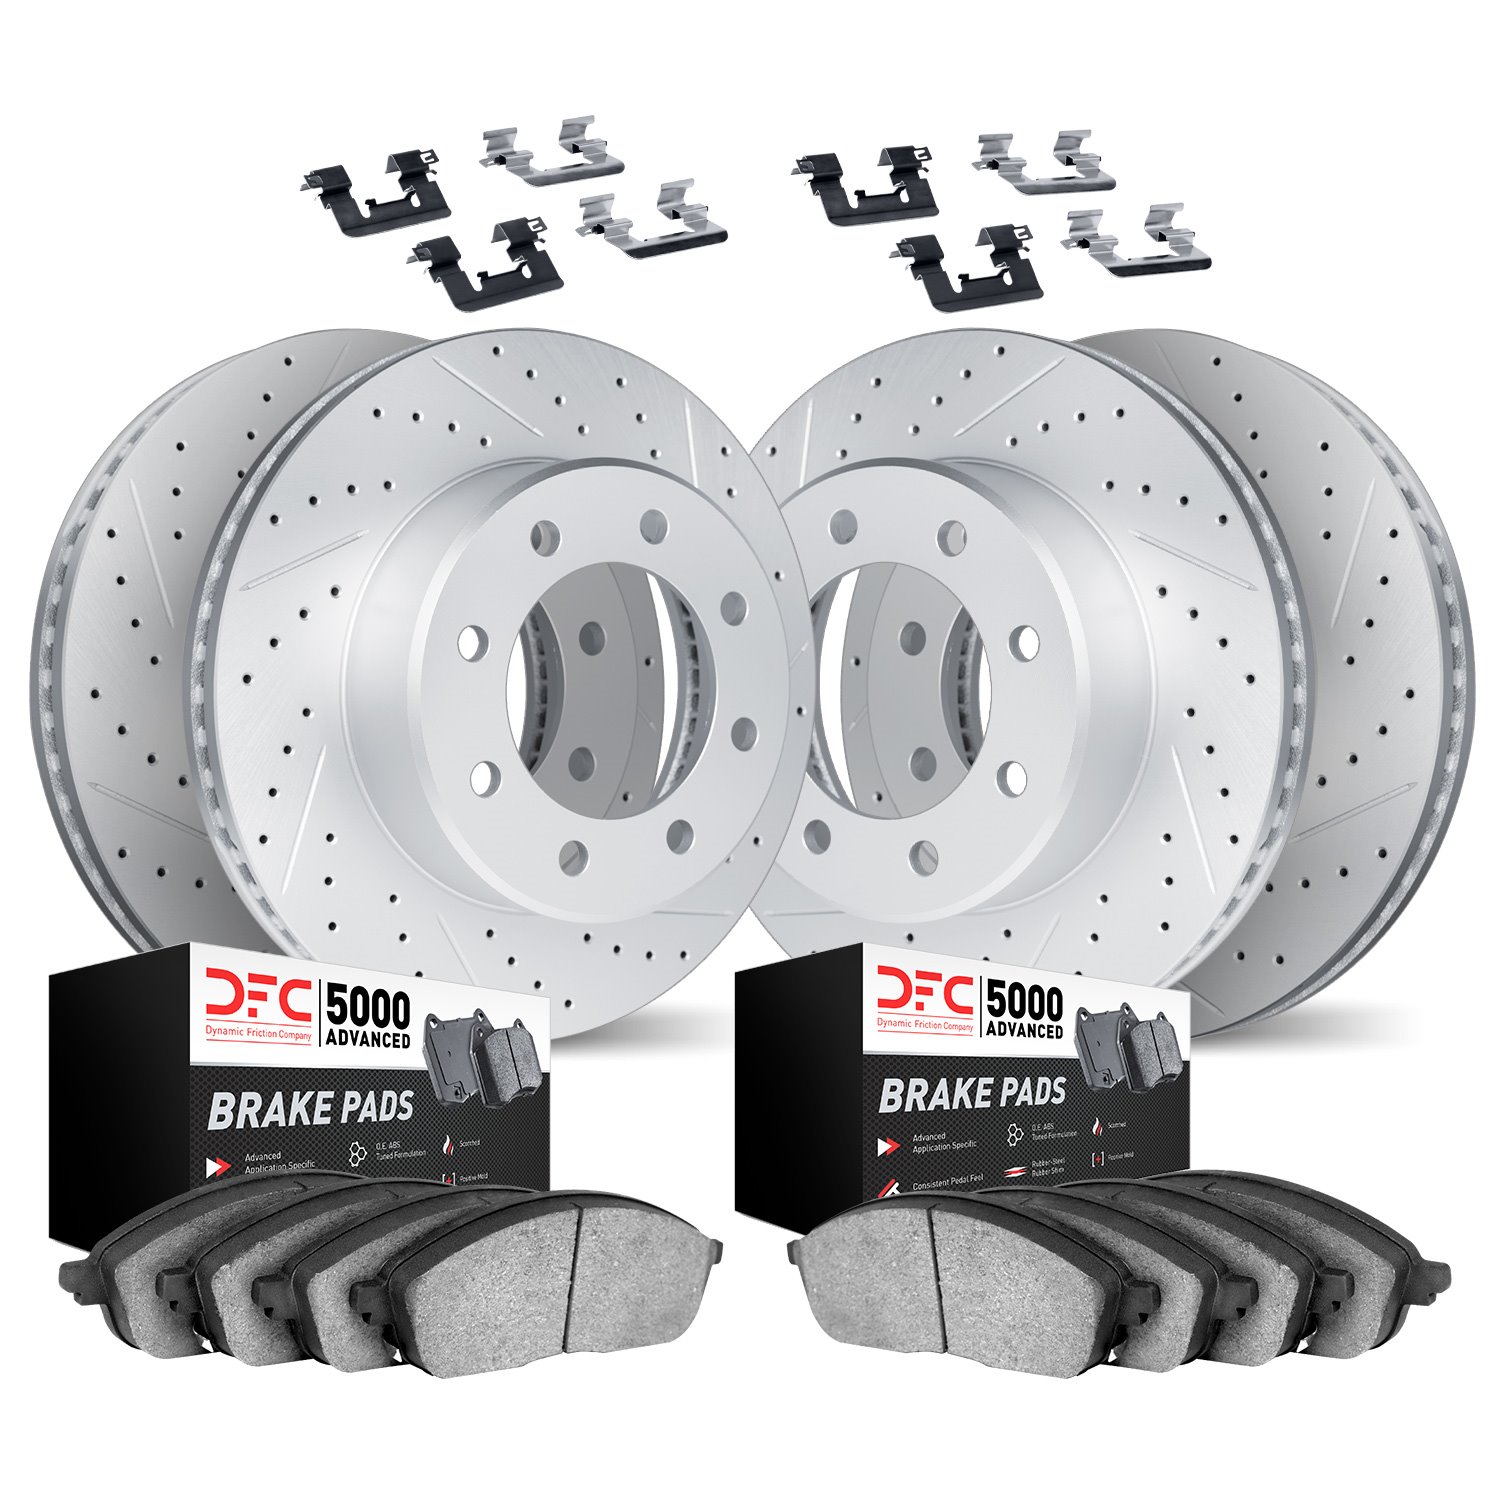 2514-48021 Geoperformance Drilled/Slotted Rotors w/5000 Advanced Brake Pads Kit & Hardware, 2003-2017 GM, Position: Front and Re